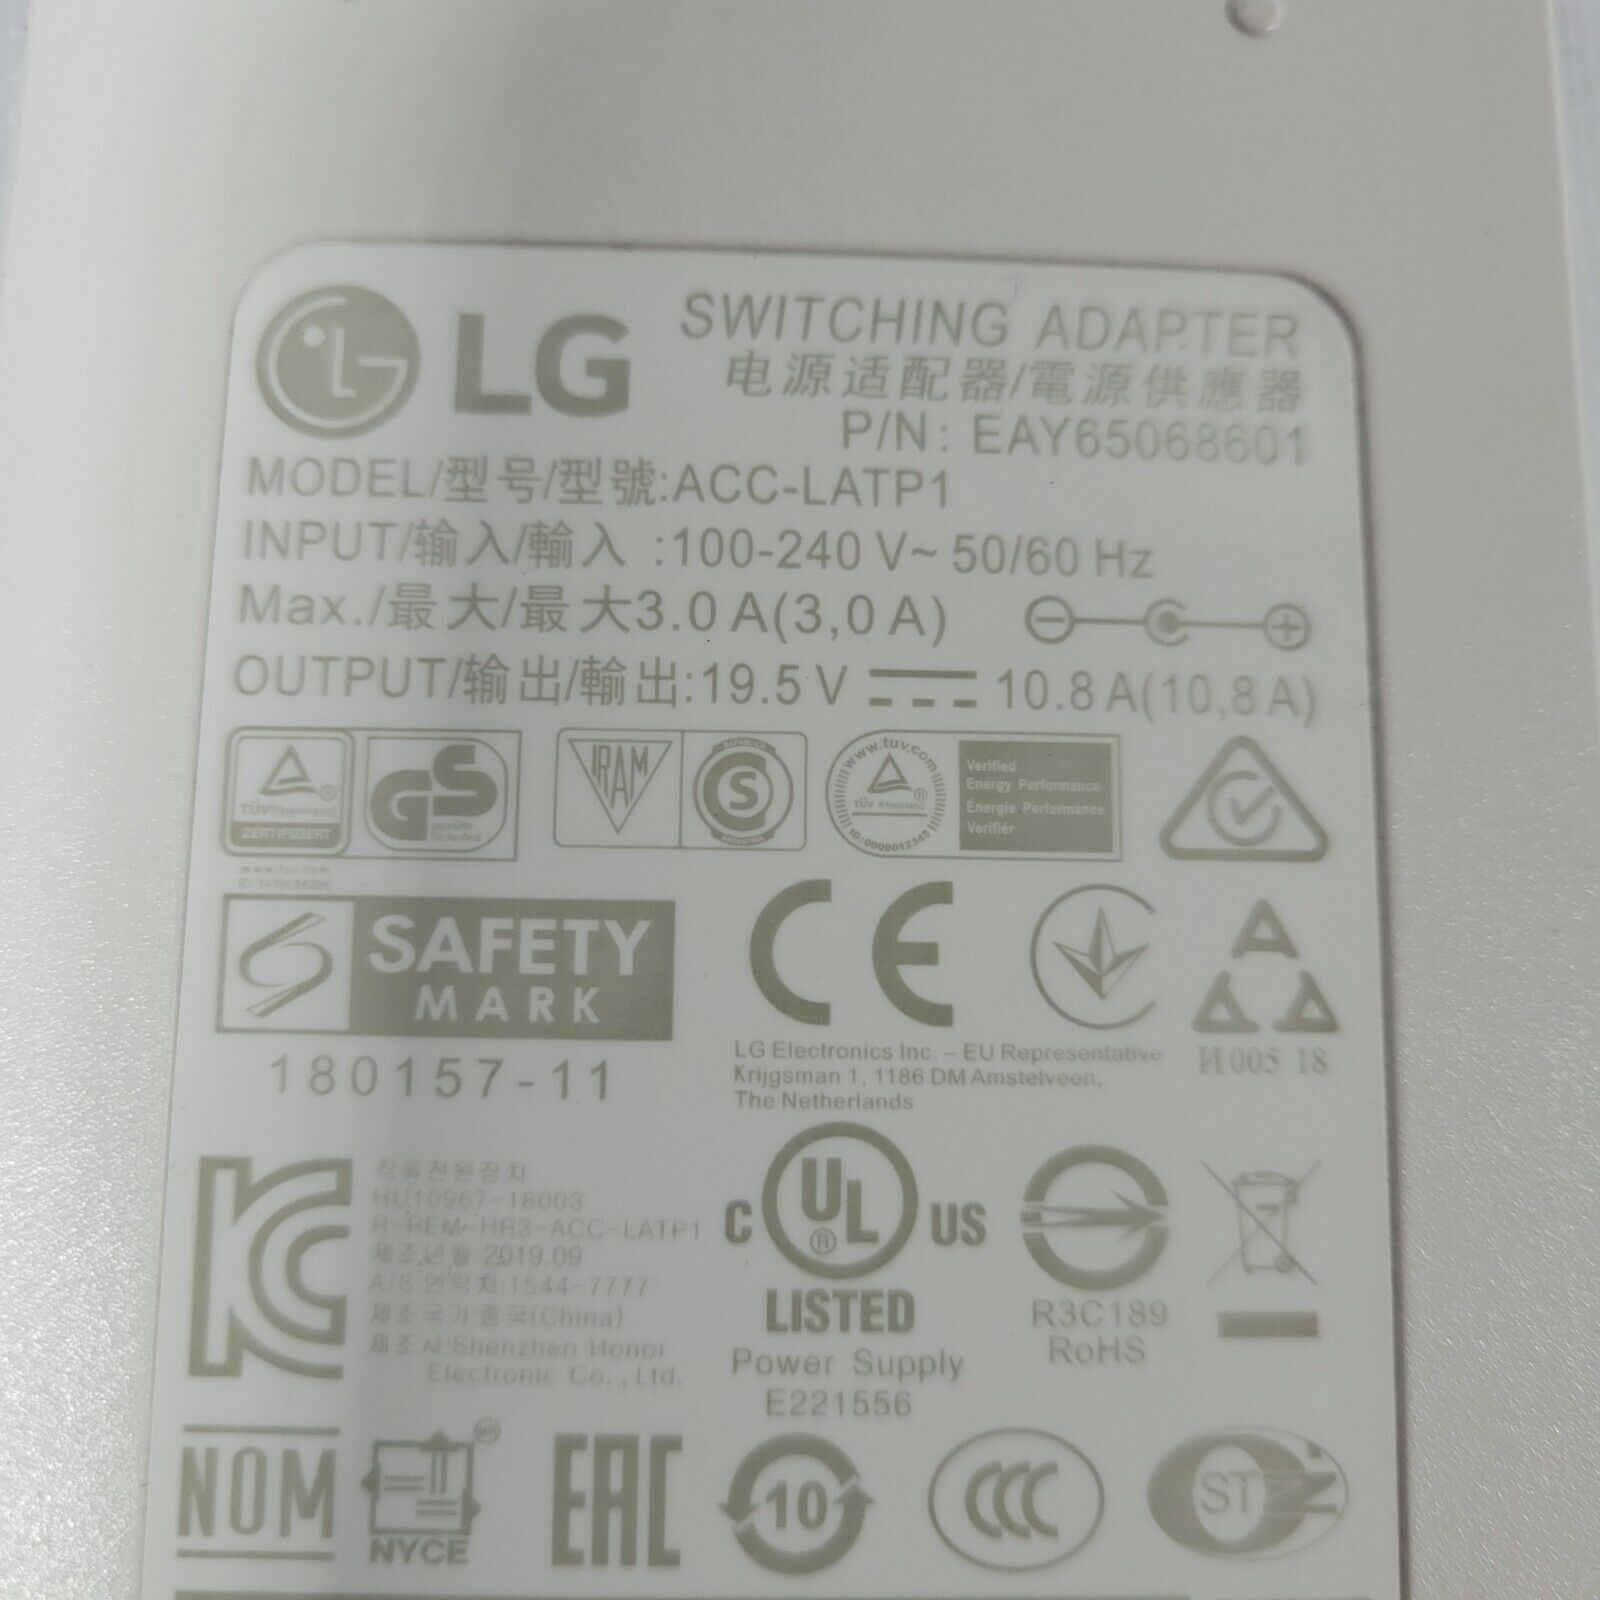 LG ACC-LATP1 Genuine Original SWITCHING ADAPTER Power Supply Charger 19.5V AC Country/Region of Manufacture: C